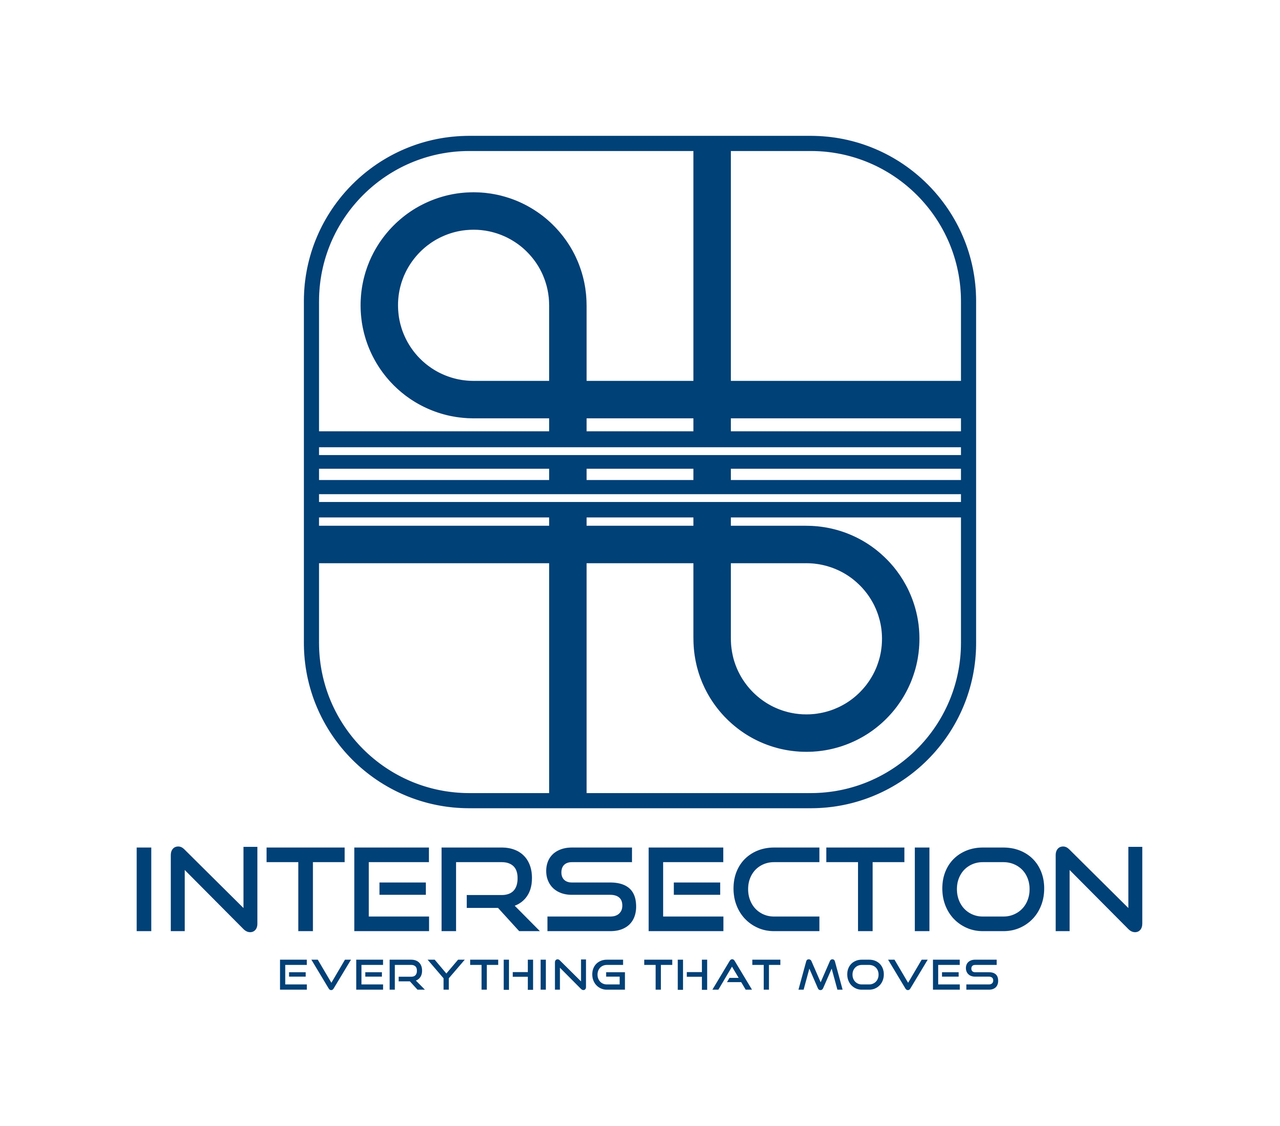 Intersection: Everything That Moves